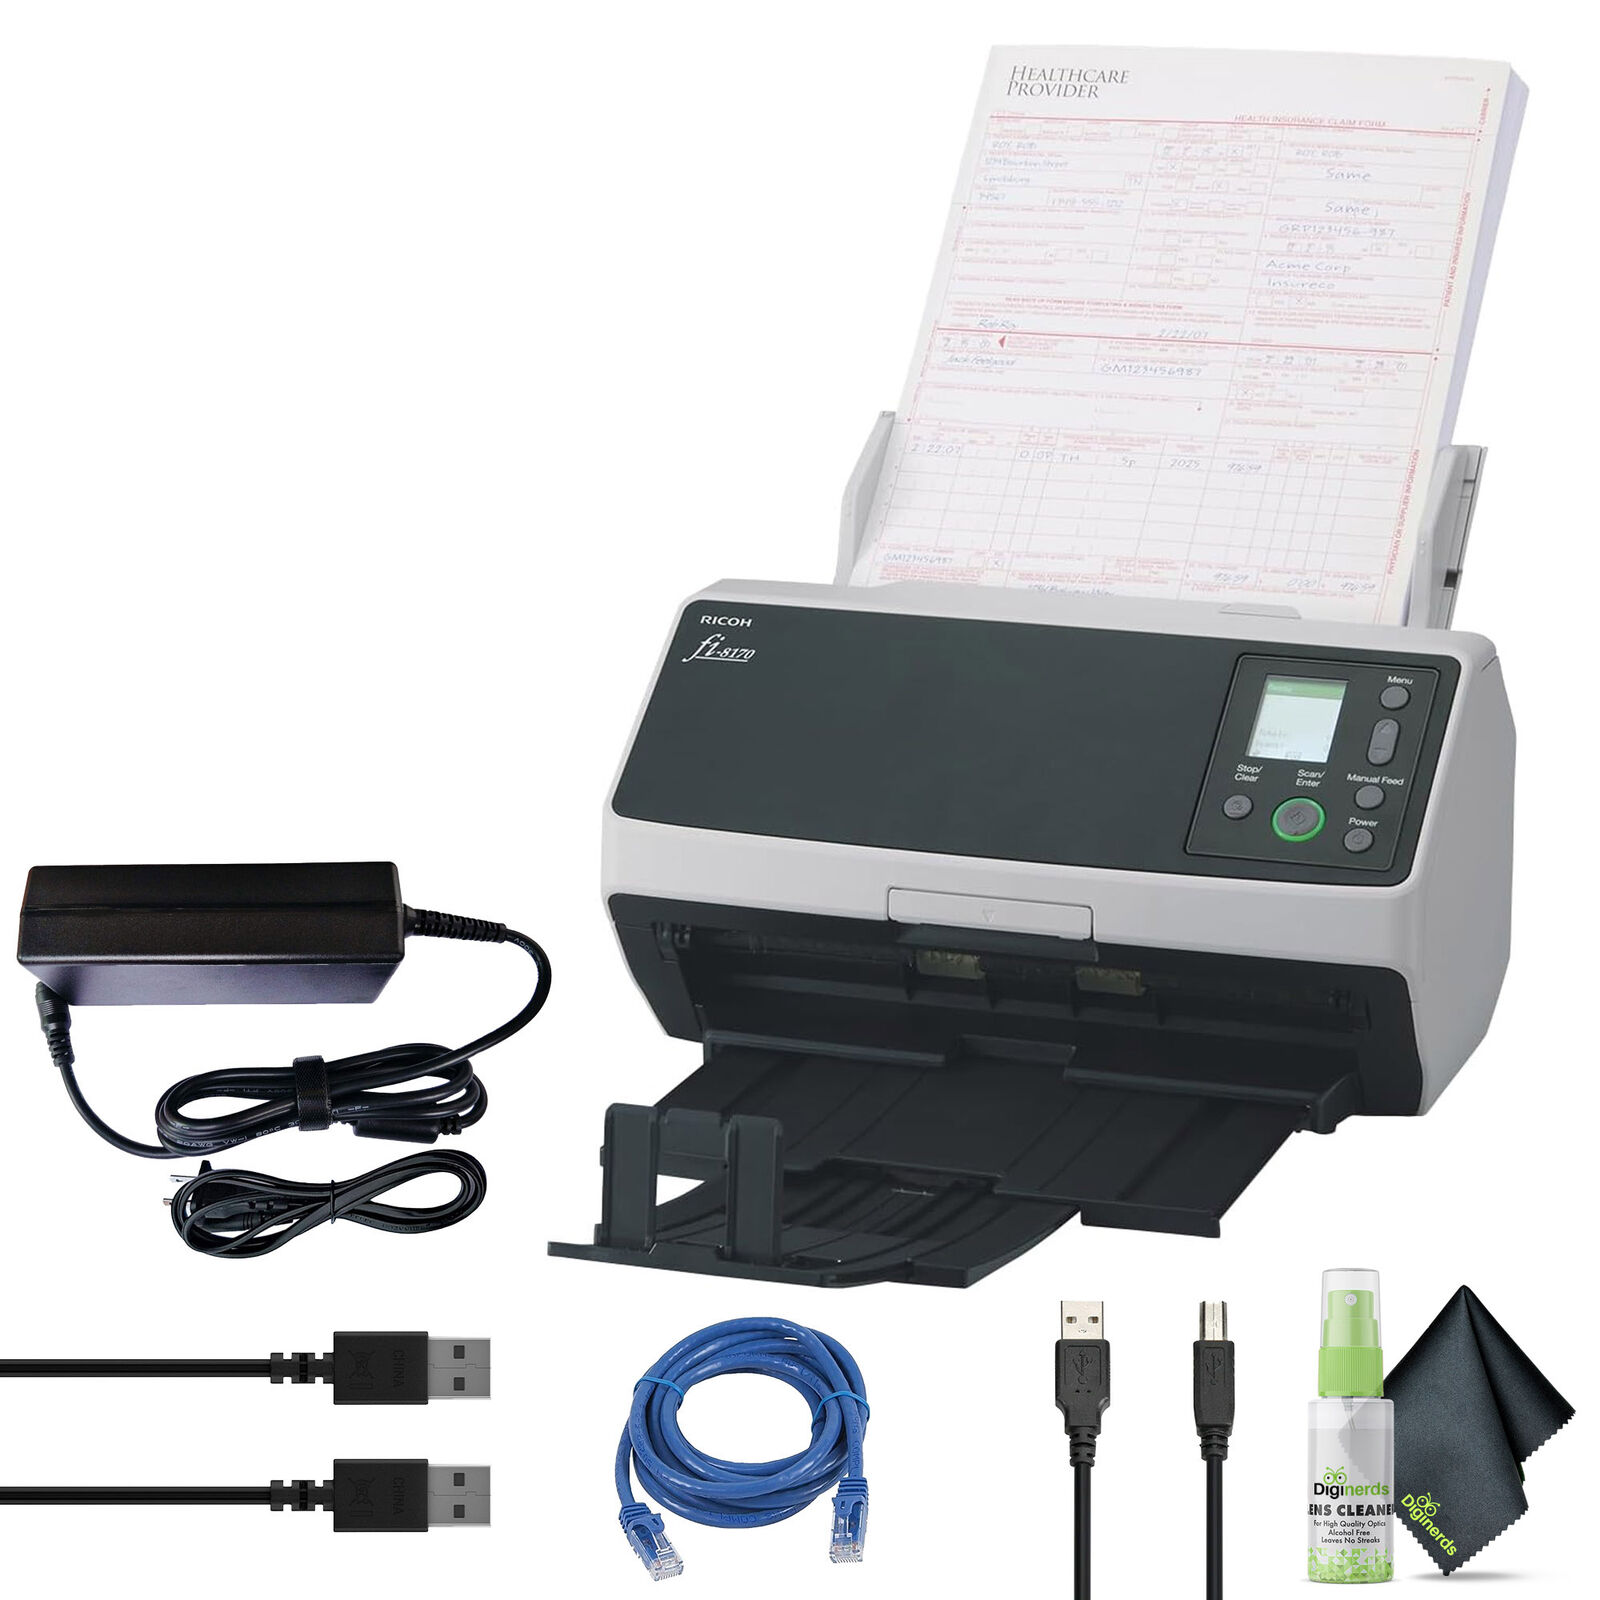 RICOH fi-8170 Professional High Speed Color Duplex Document Scanner